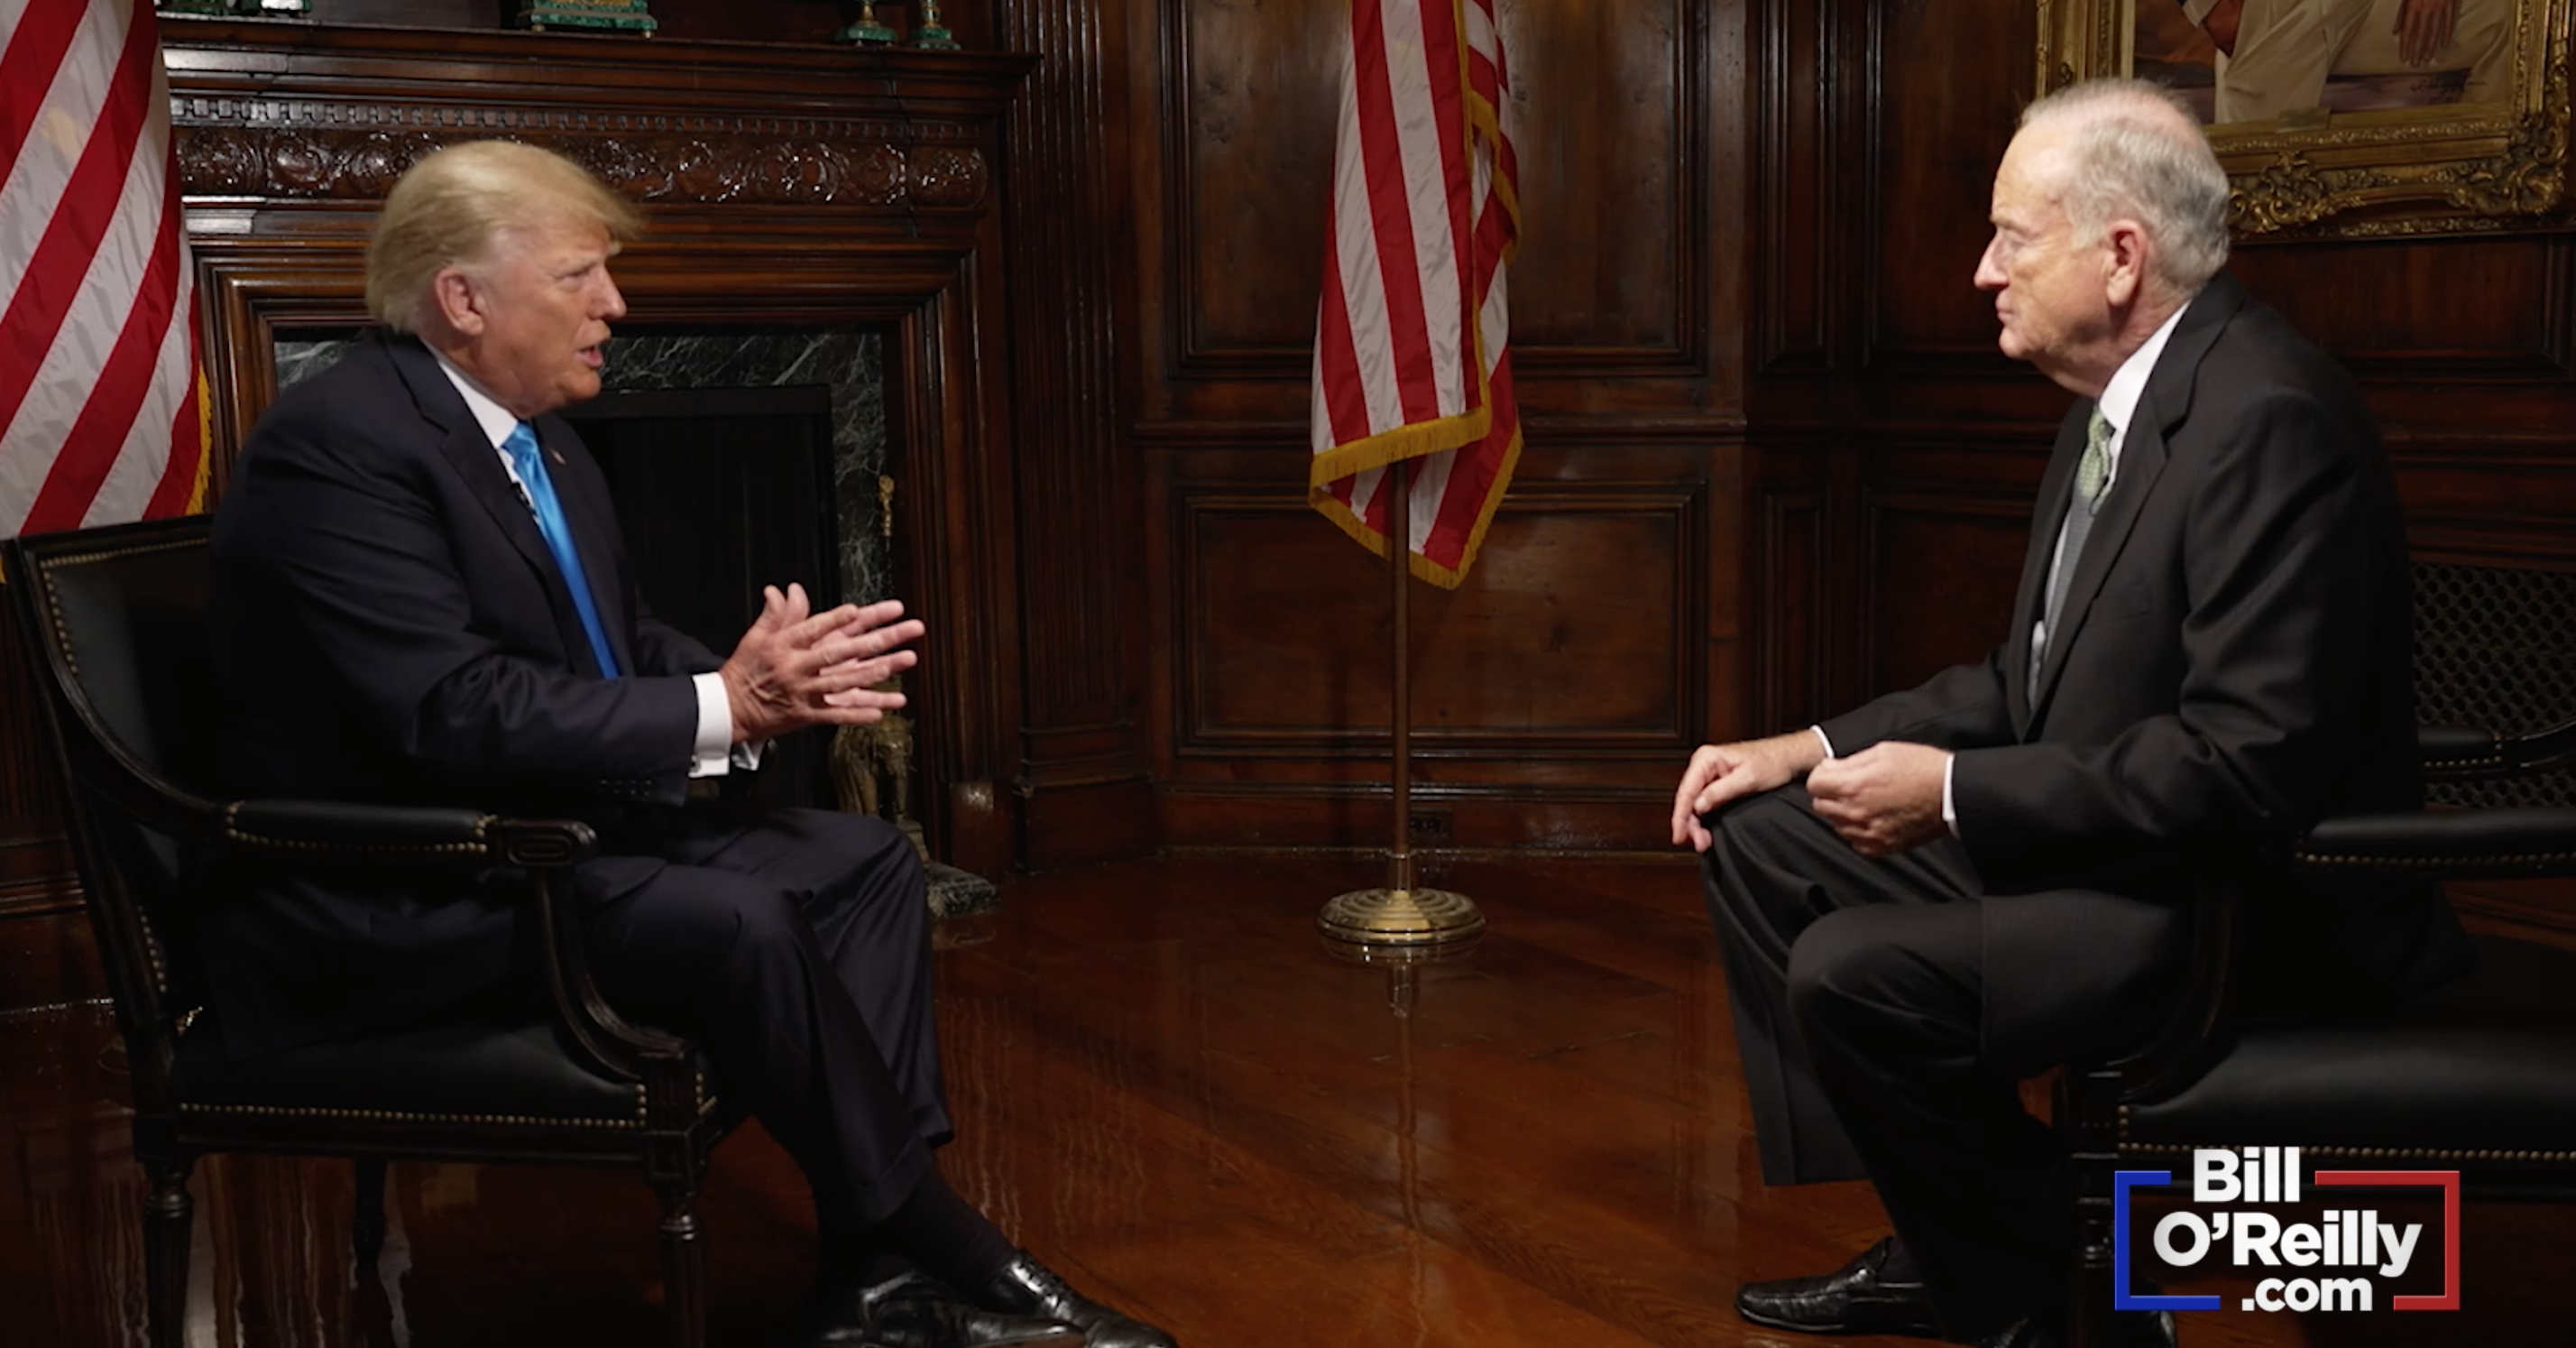 WATCH: Trump and O'Reilly Discuss Inflation